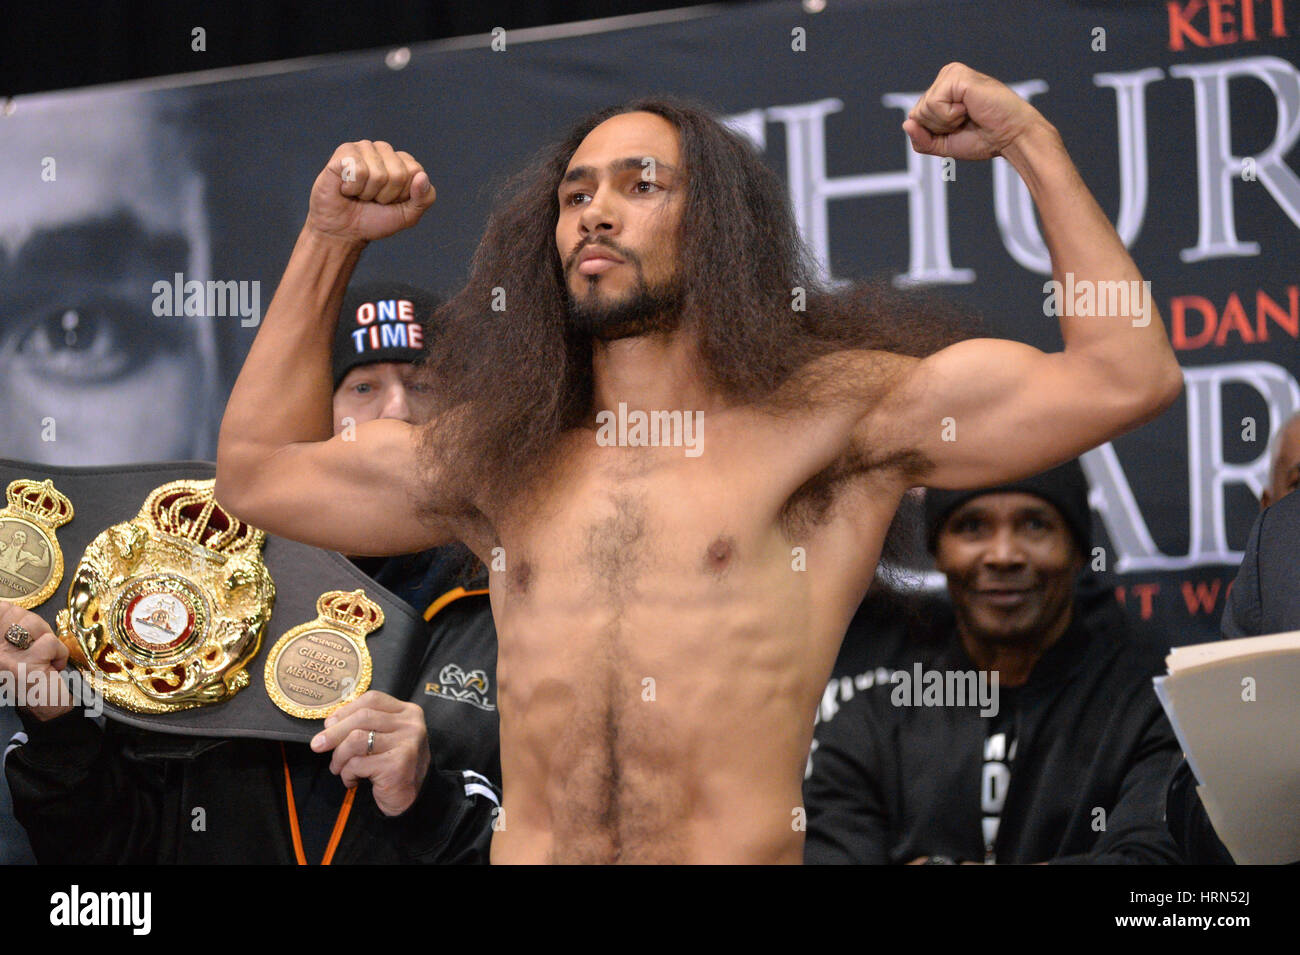 New York, USA- 03 Mar 2017- Boxer Keith Thurman at the official weigh-in for his welterweight championship fight against Danny Garcia on March 4, 2017 at the Barclay's Center in Brooklyn, New York. credit: Erik Pendzich Credit: Erik Pendzich/Alamy Live News Stock Photo